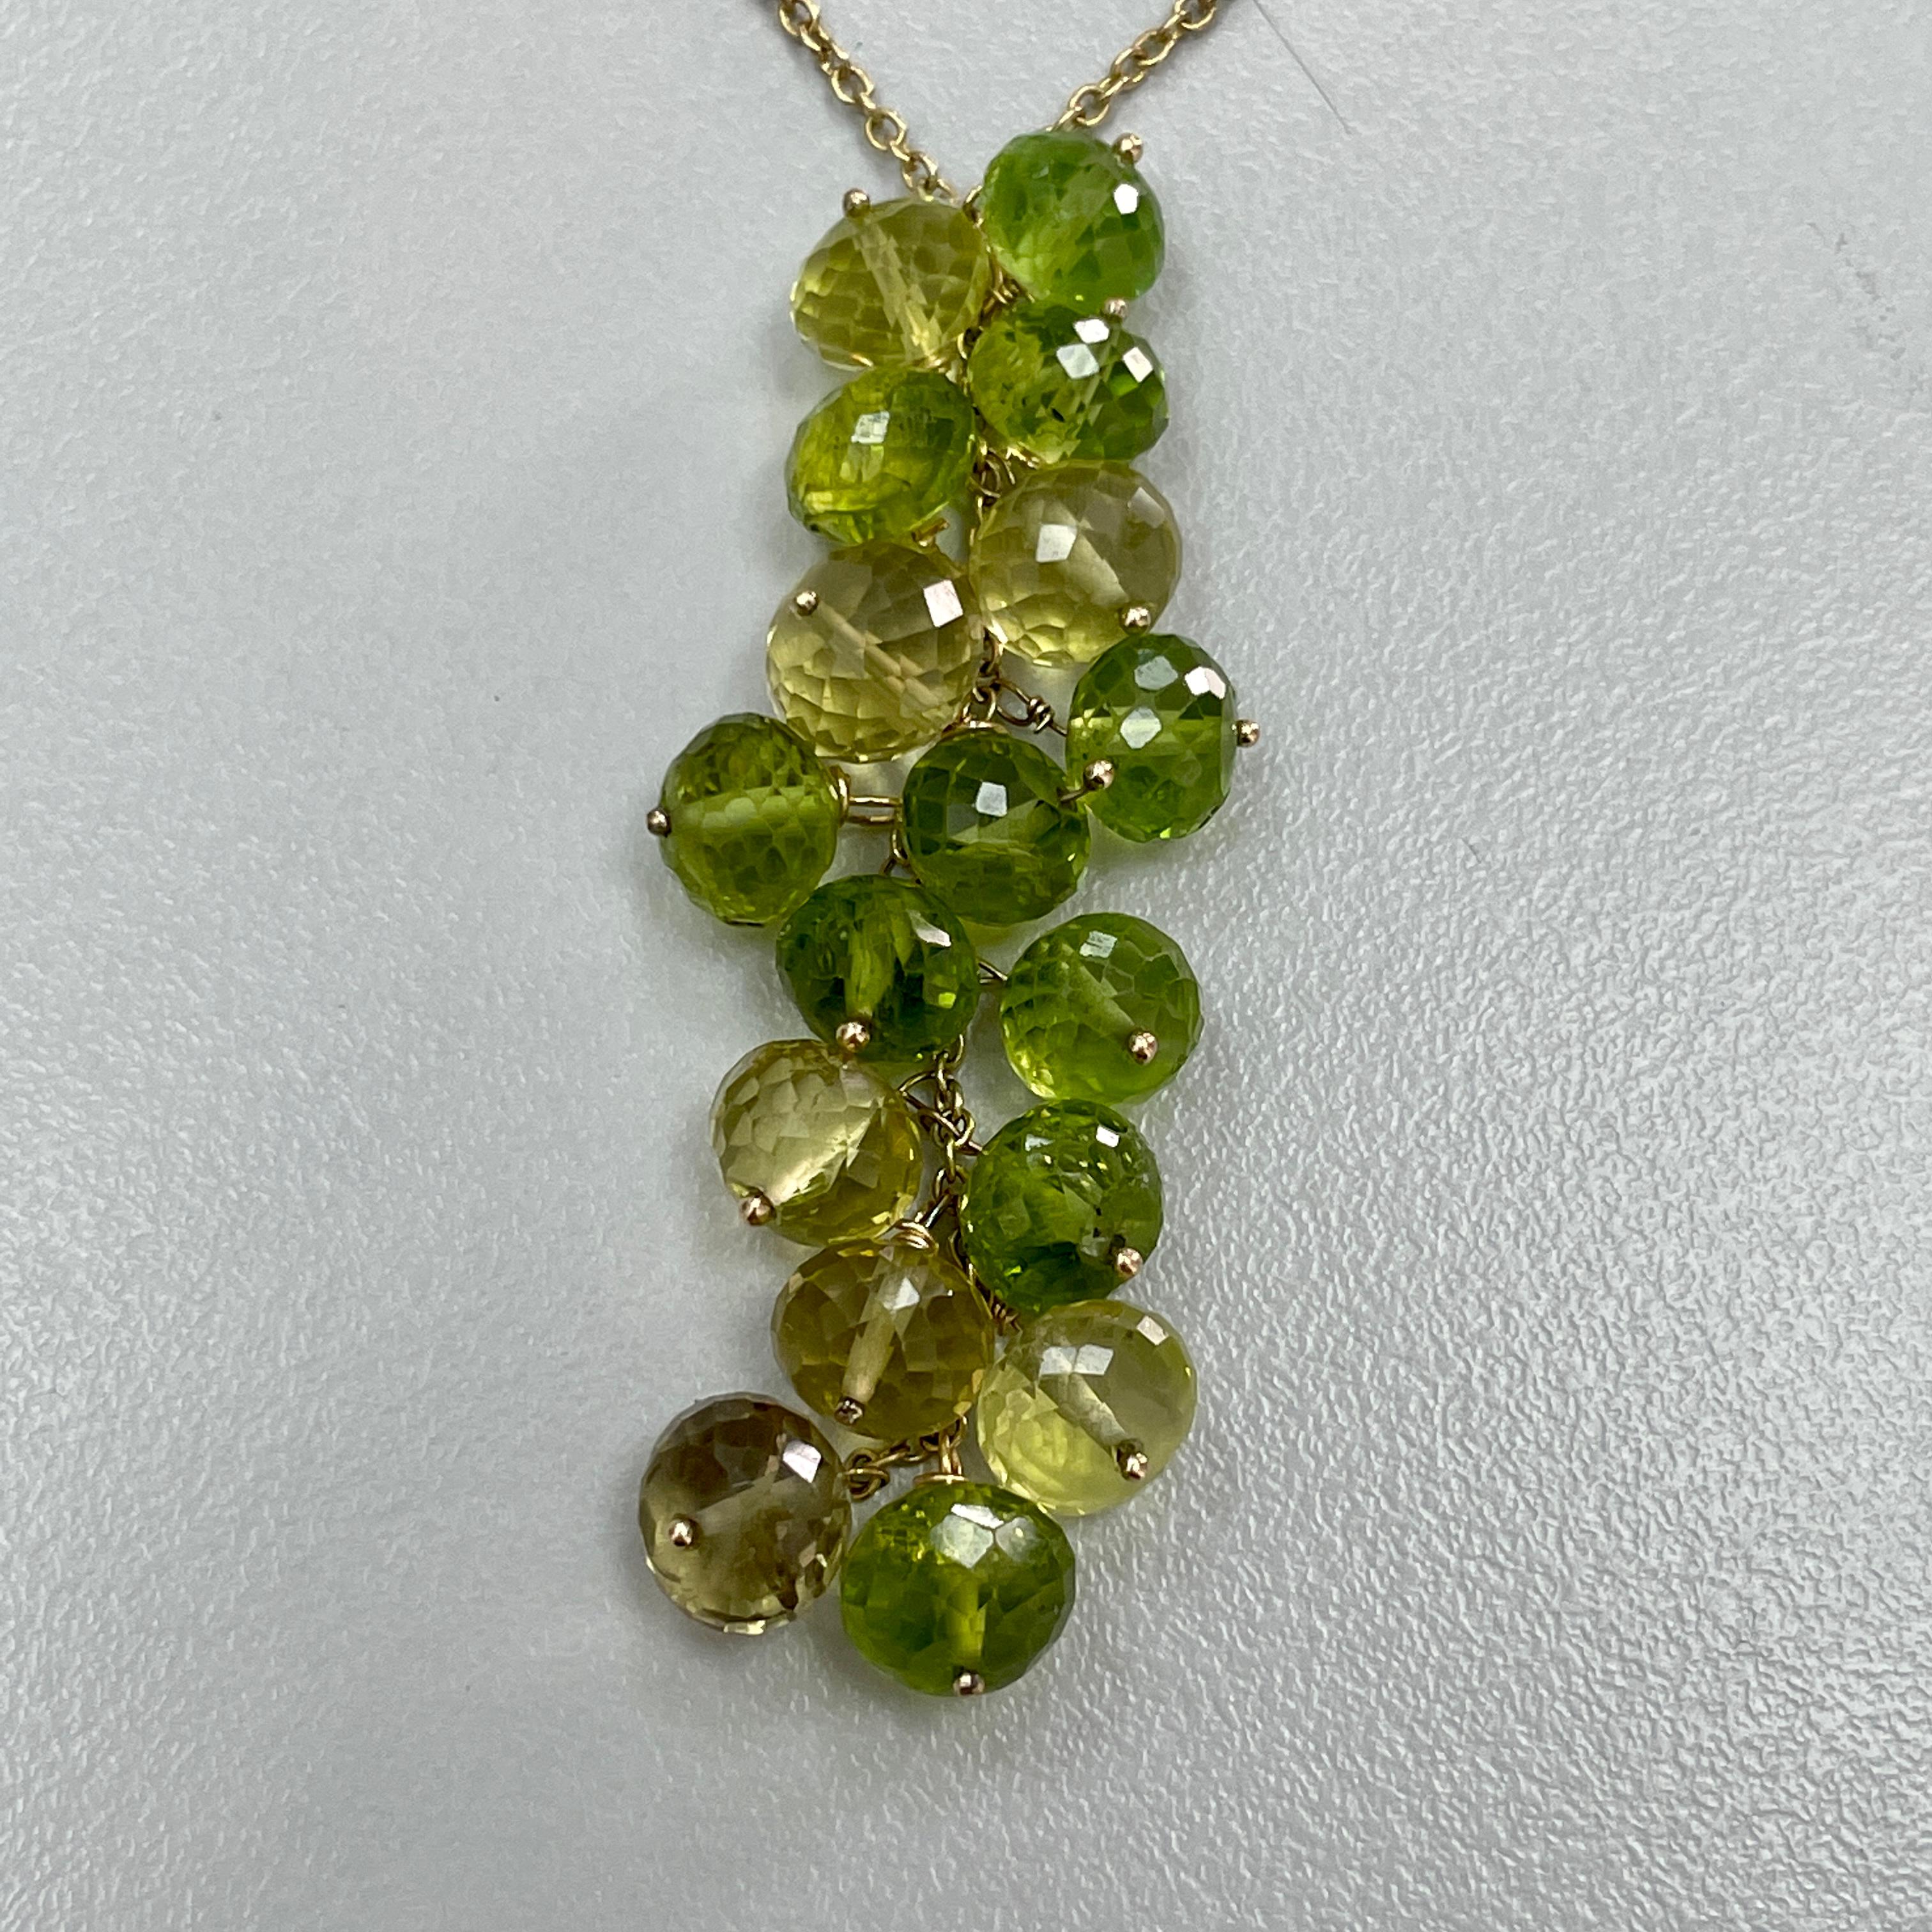 Bead Green Peridot Yellow Cognac Necklace For Sale